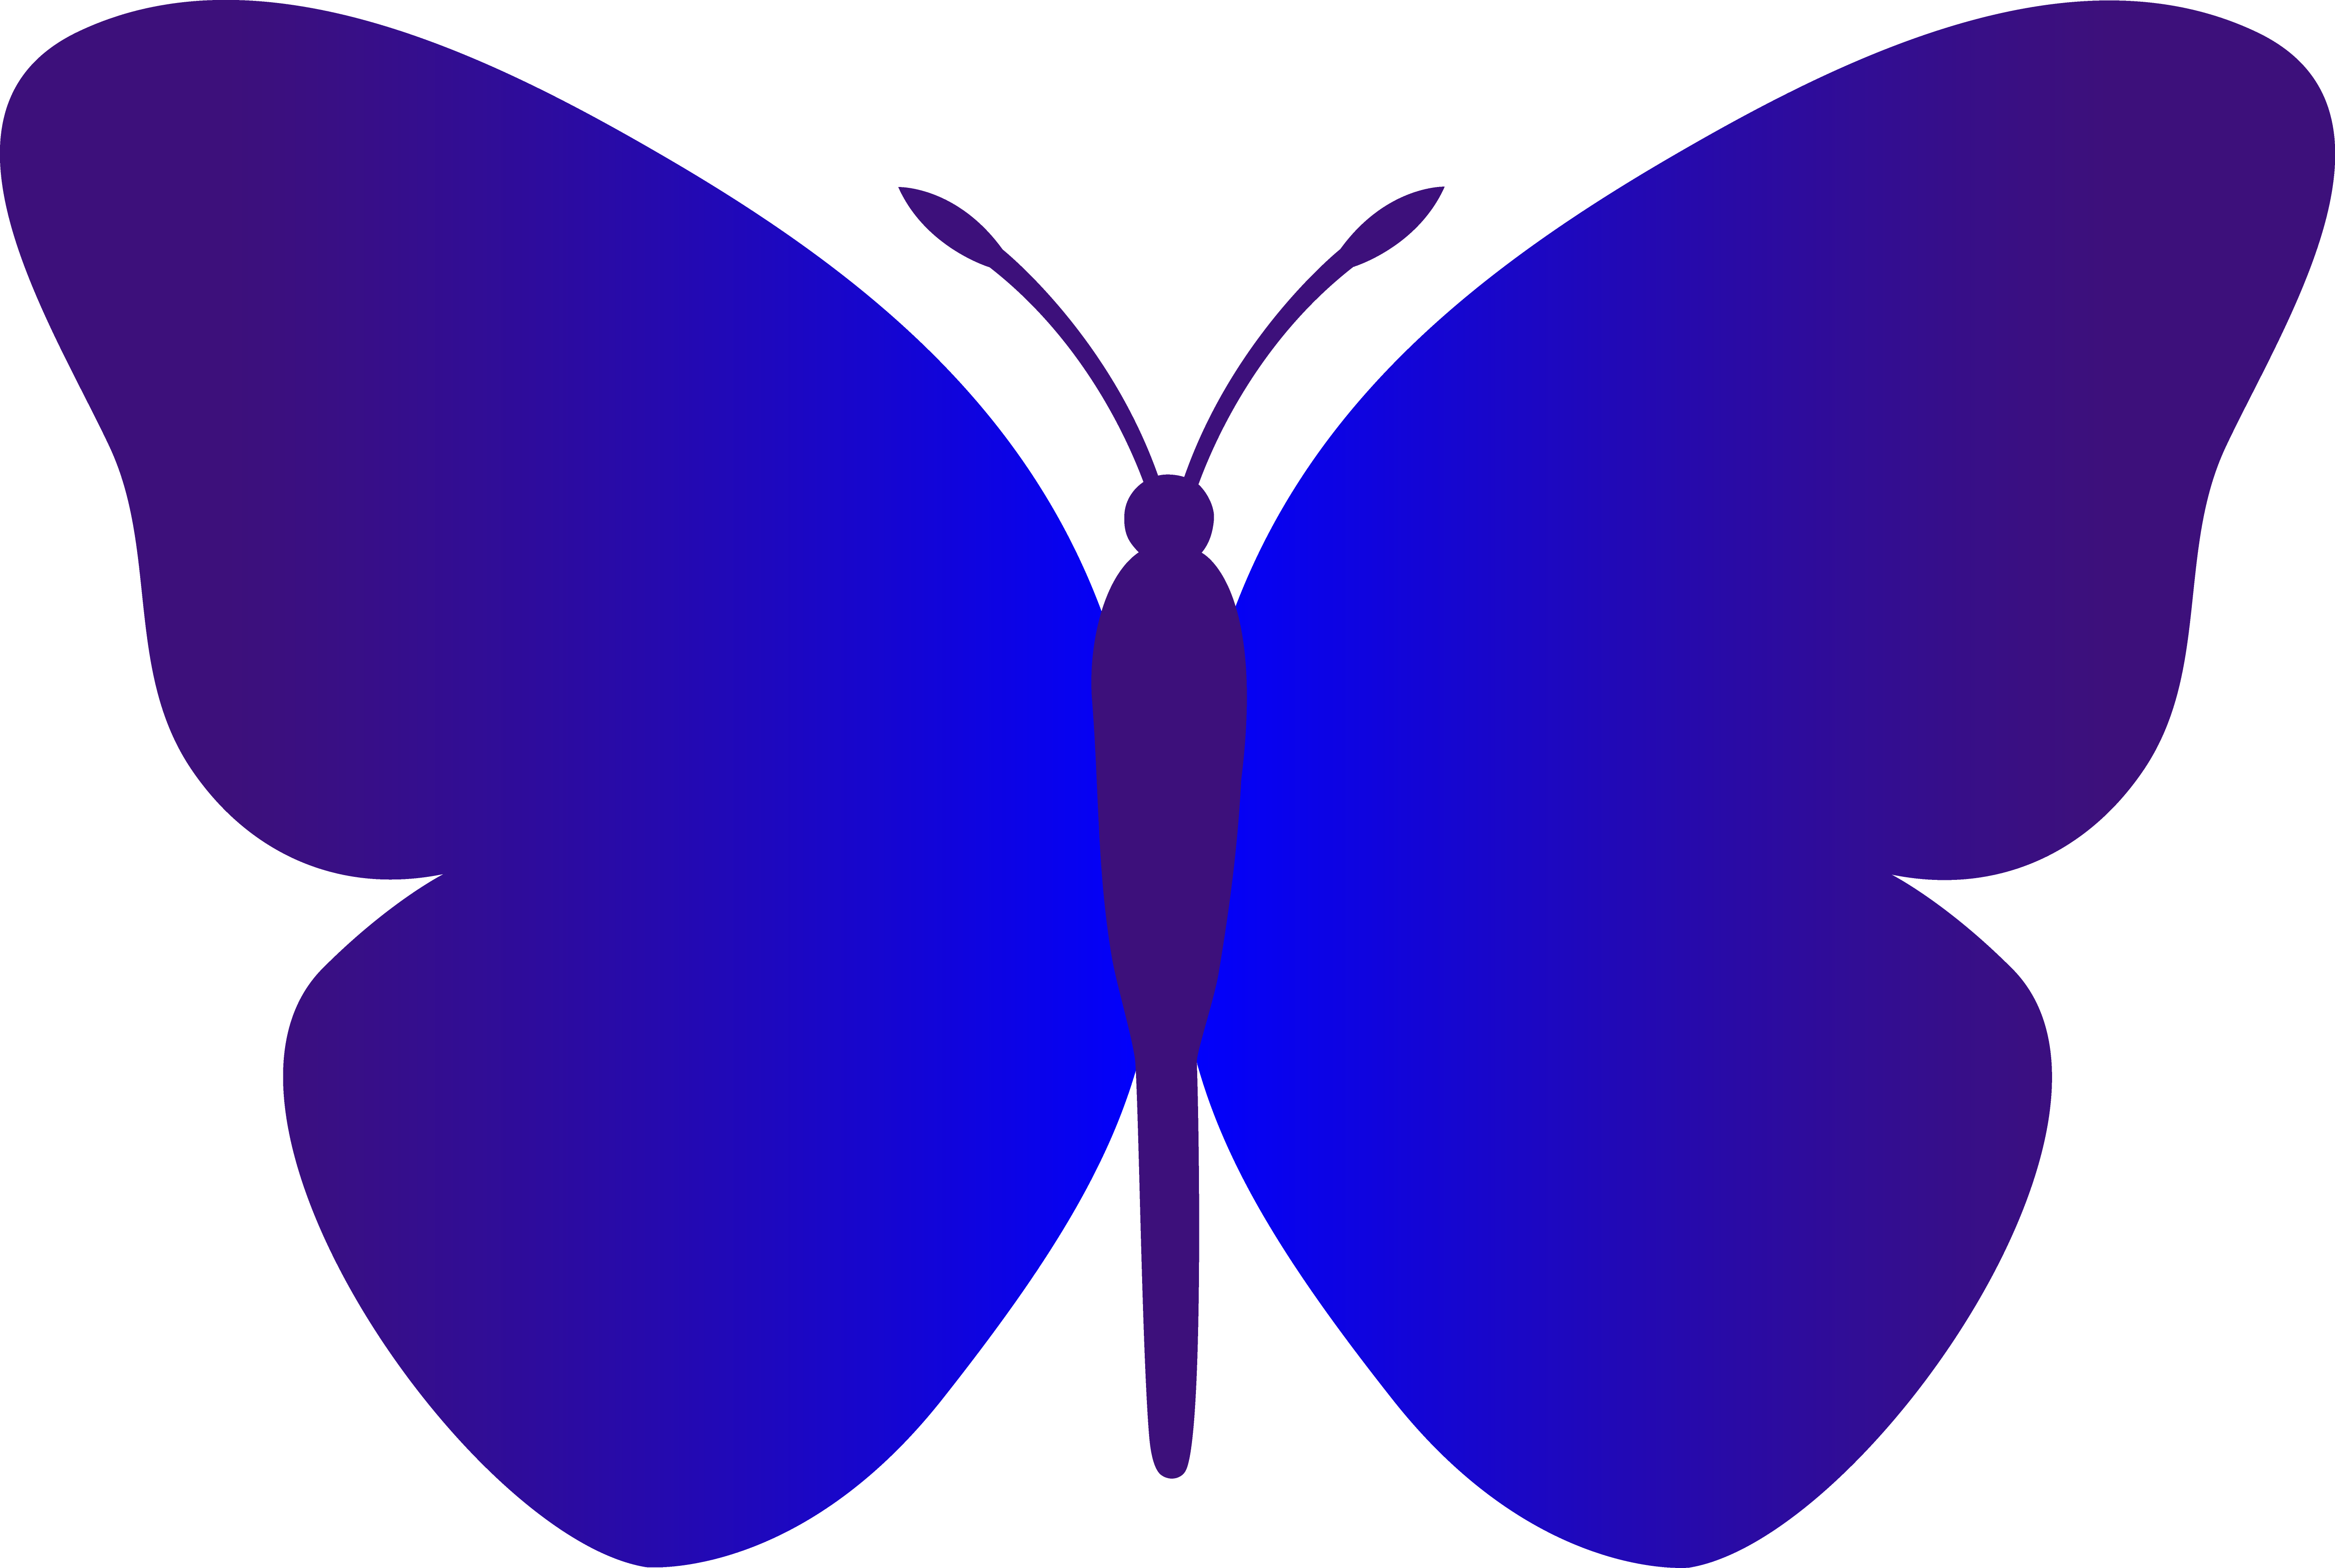 Free butterfly clipart.